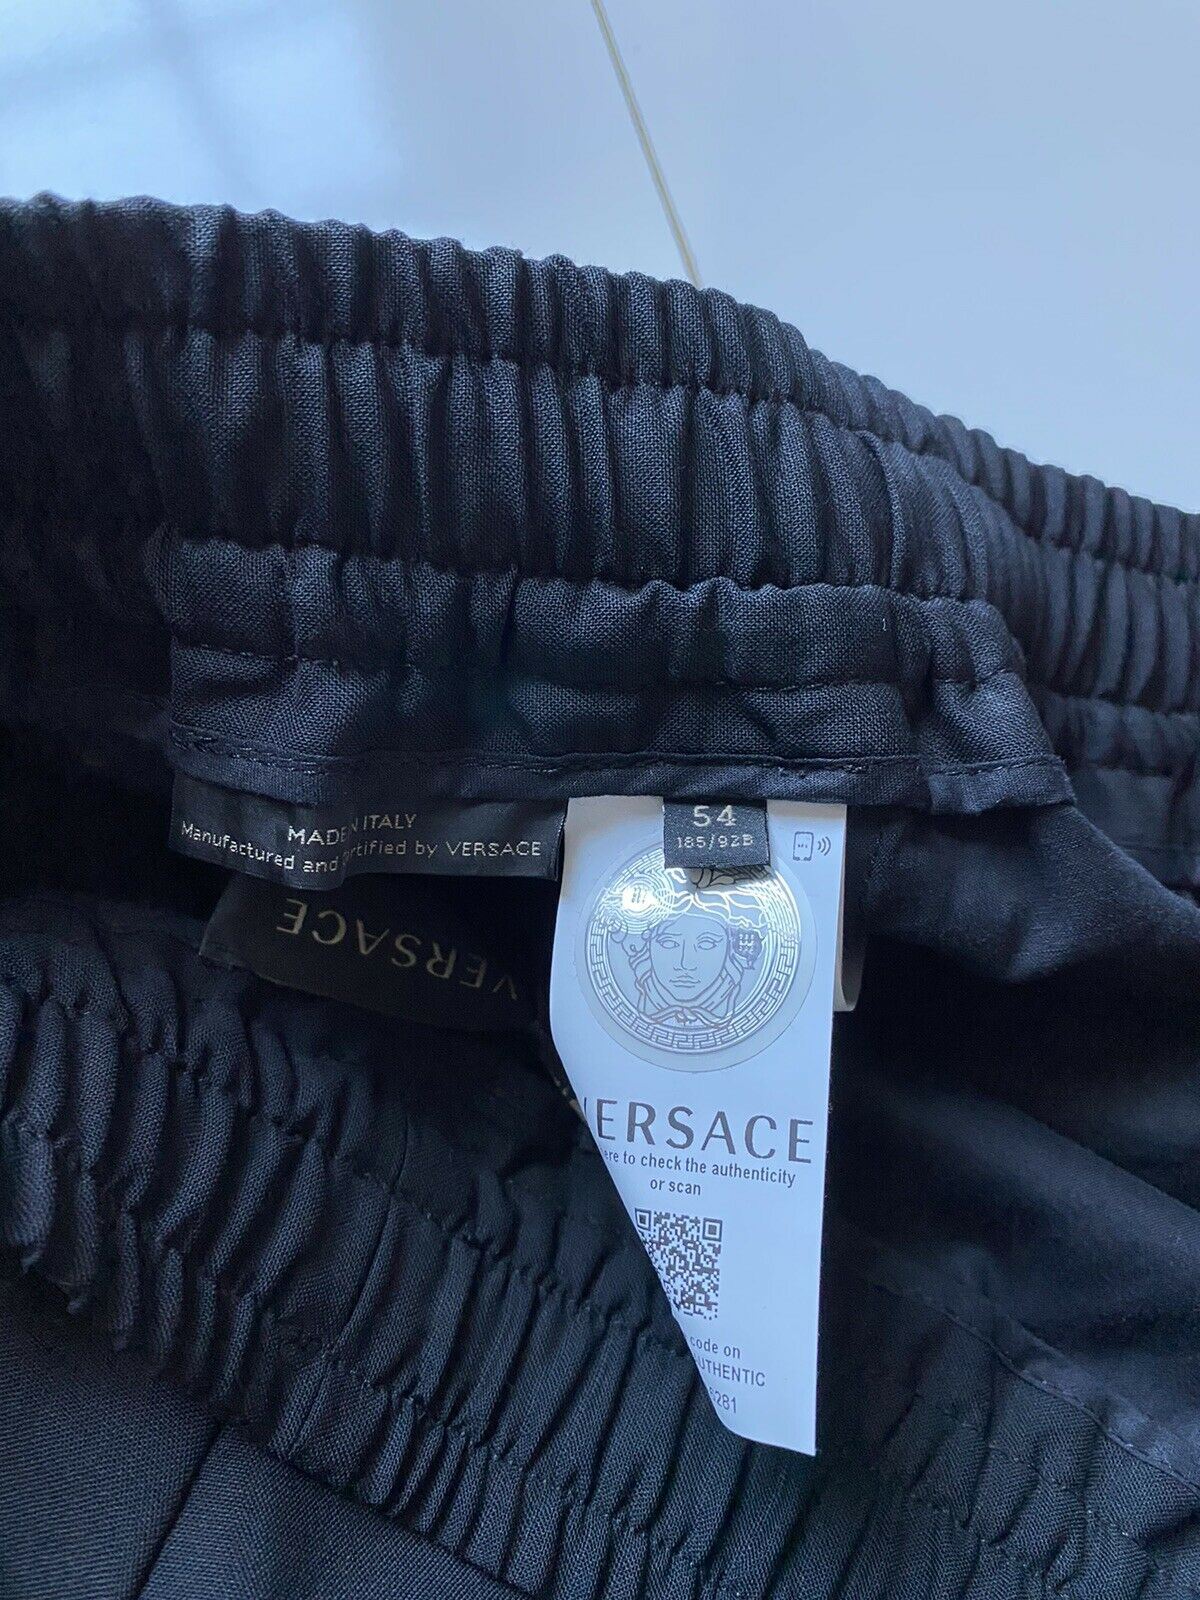 NWT $595 Versace Mens Black Wool Pants Size 38 US (54 Euro) Made in Italy A83072